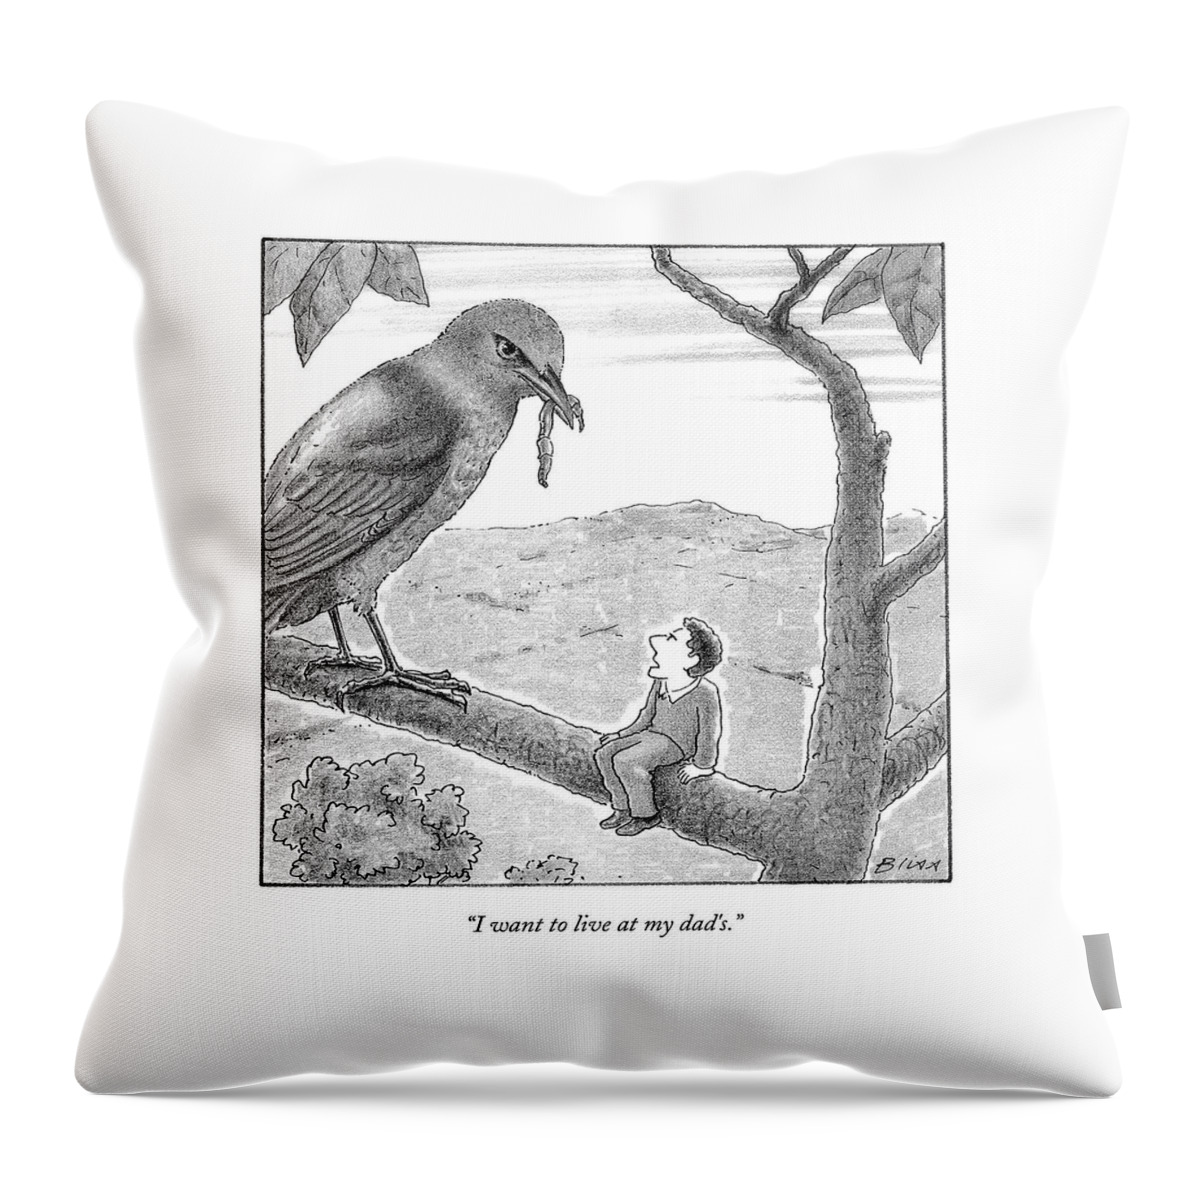 Tiny Man Looks Up At Bird As He Sits On A Branch Throw Pillow